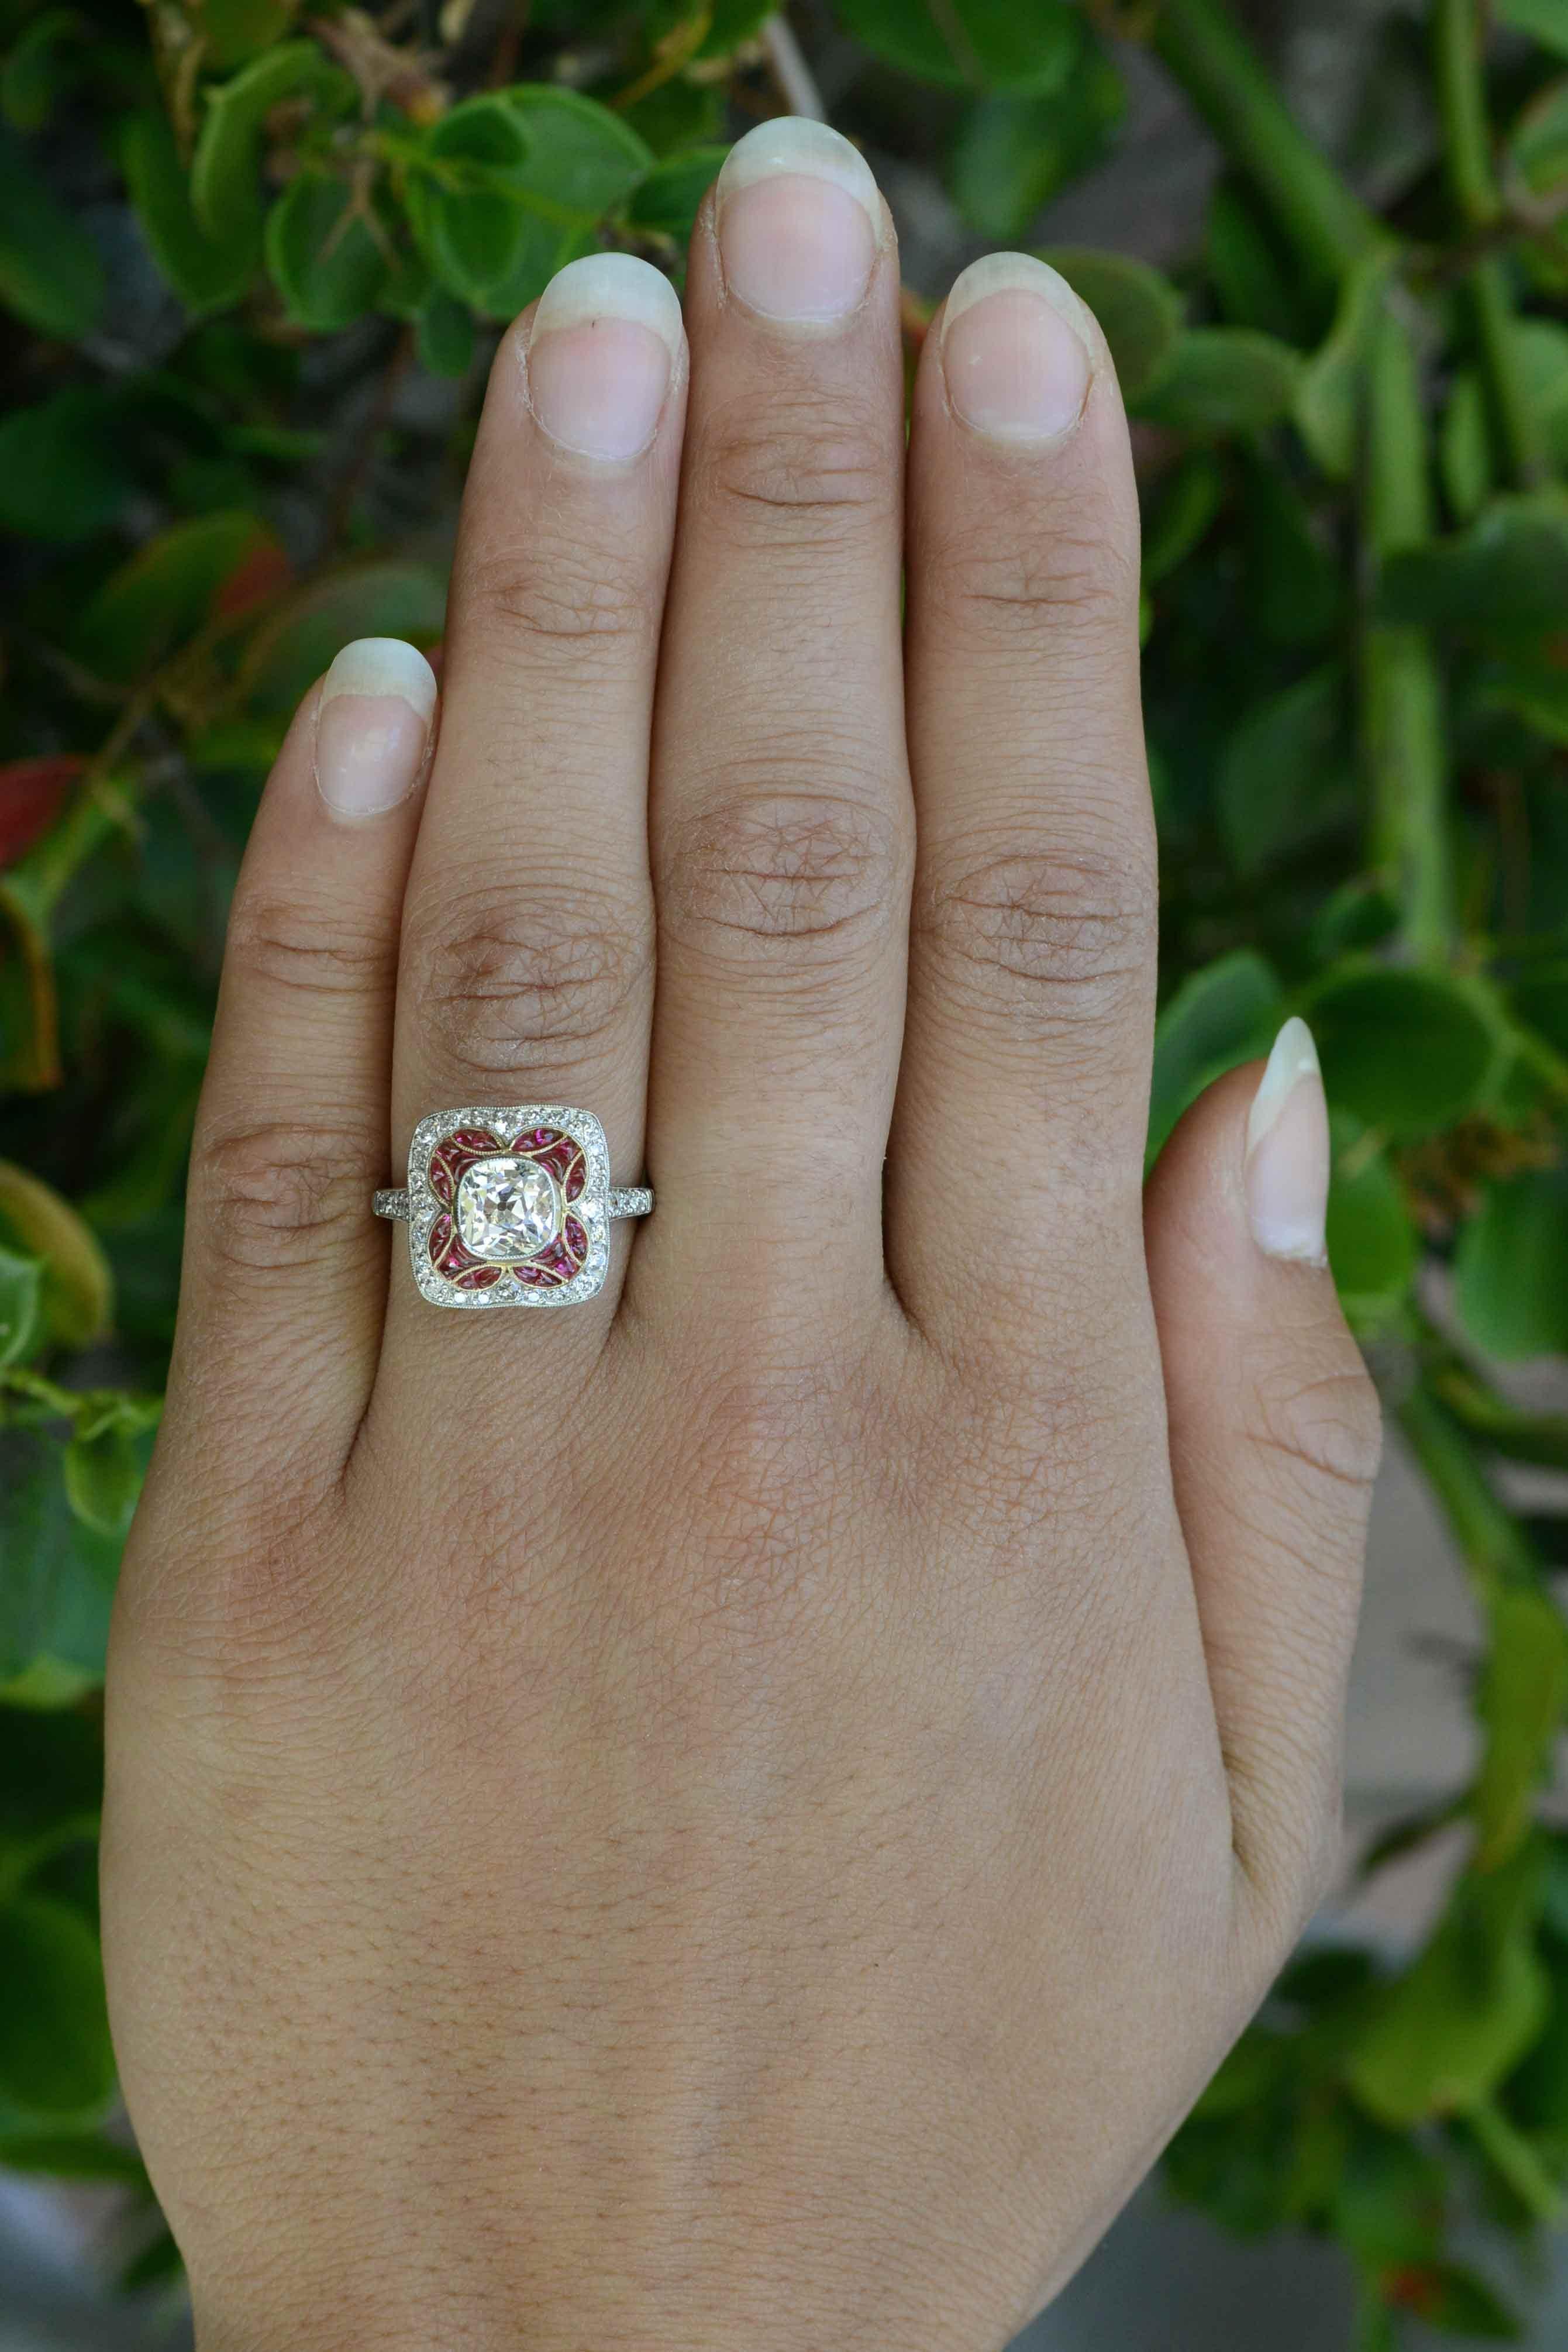 An exciting old mine cut diamond & ruby cocktail ring in a timeless Art Deco style, with a micro mosaic bombe' dome that is most mesmerizing and detailed. Centered by a juicy, 1.25 carat, 100 year old cushion cut with large, chunky facets, it